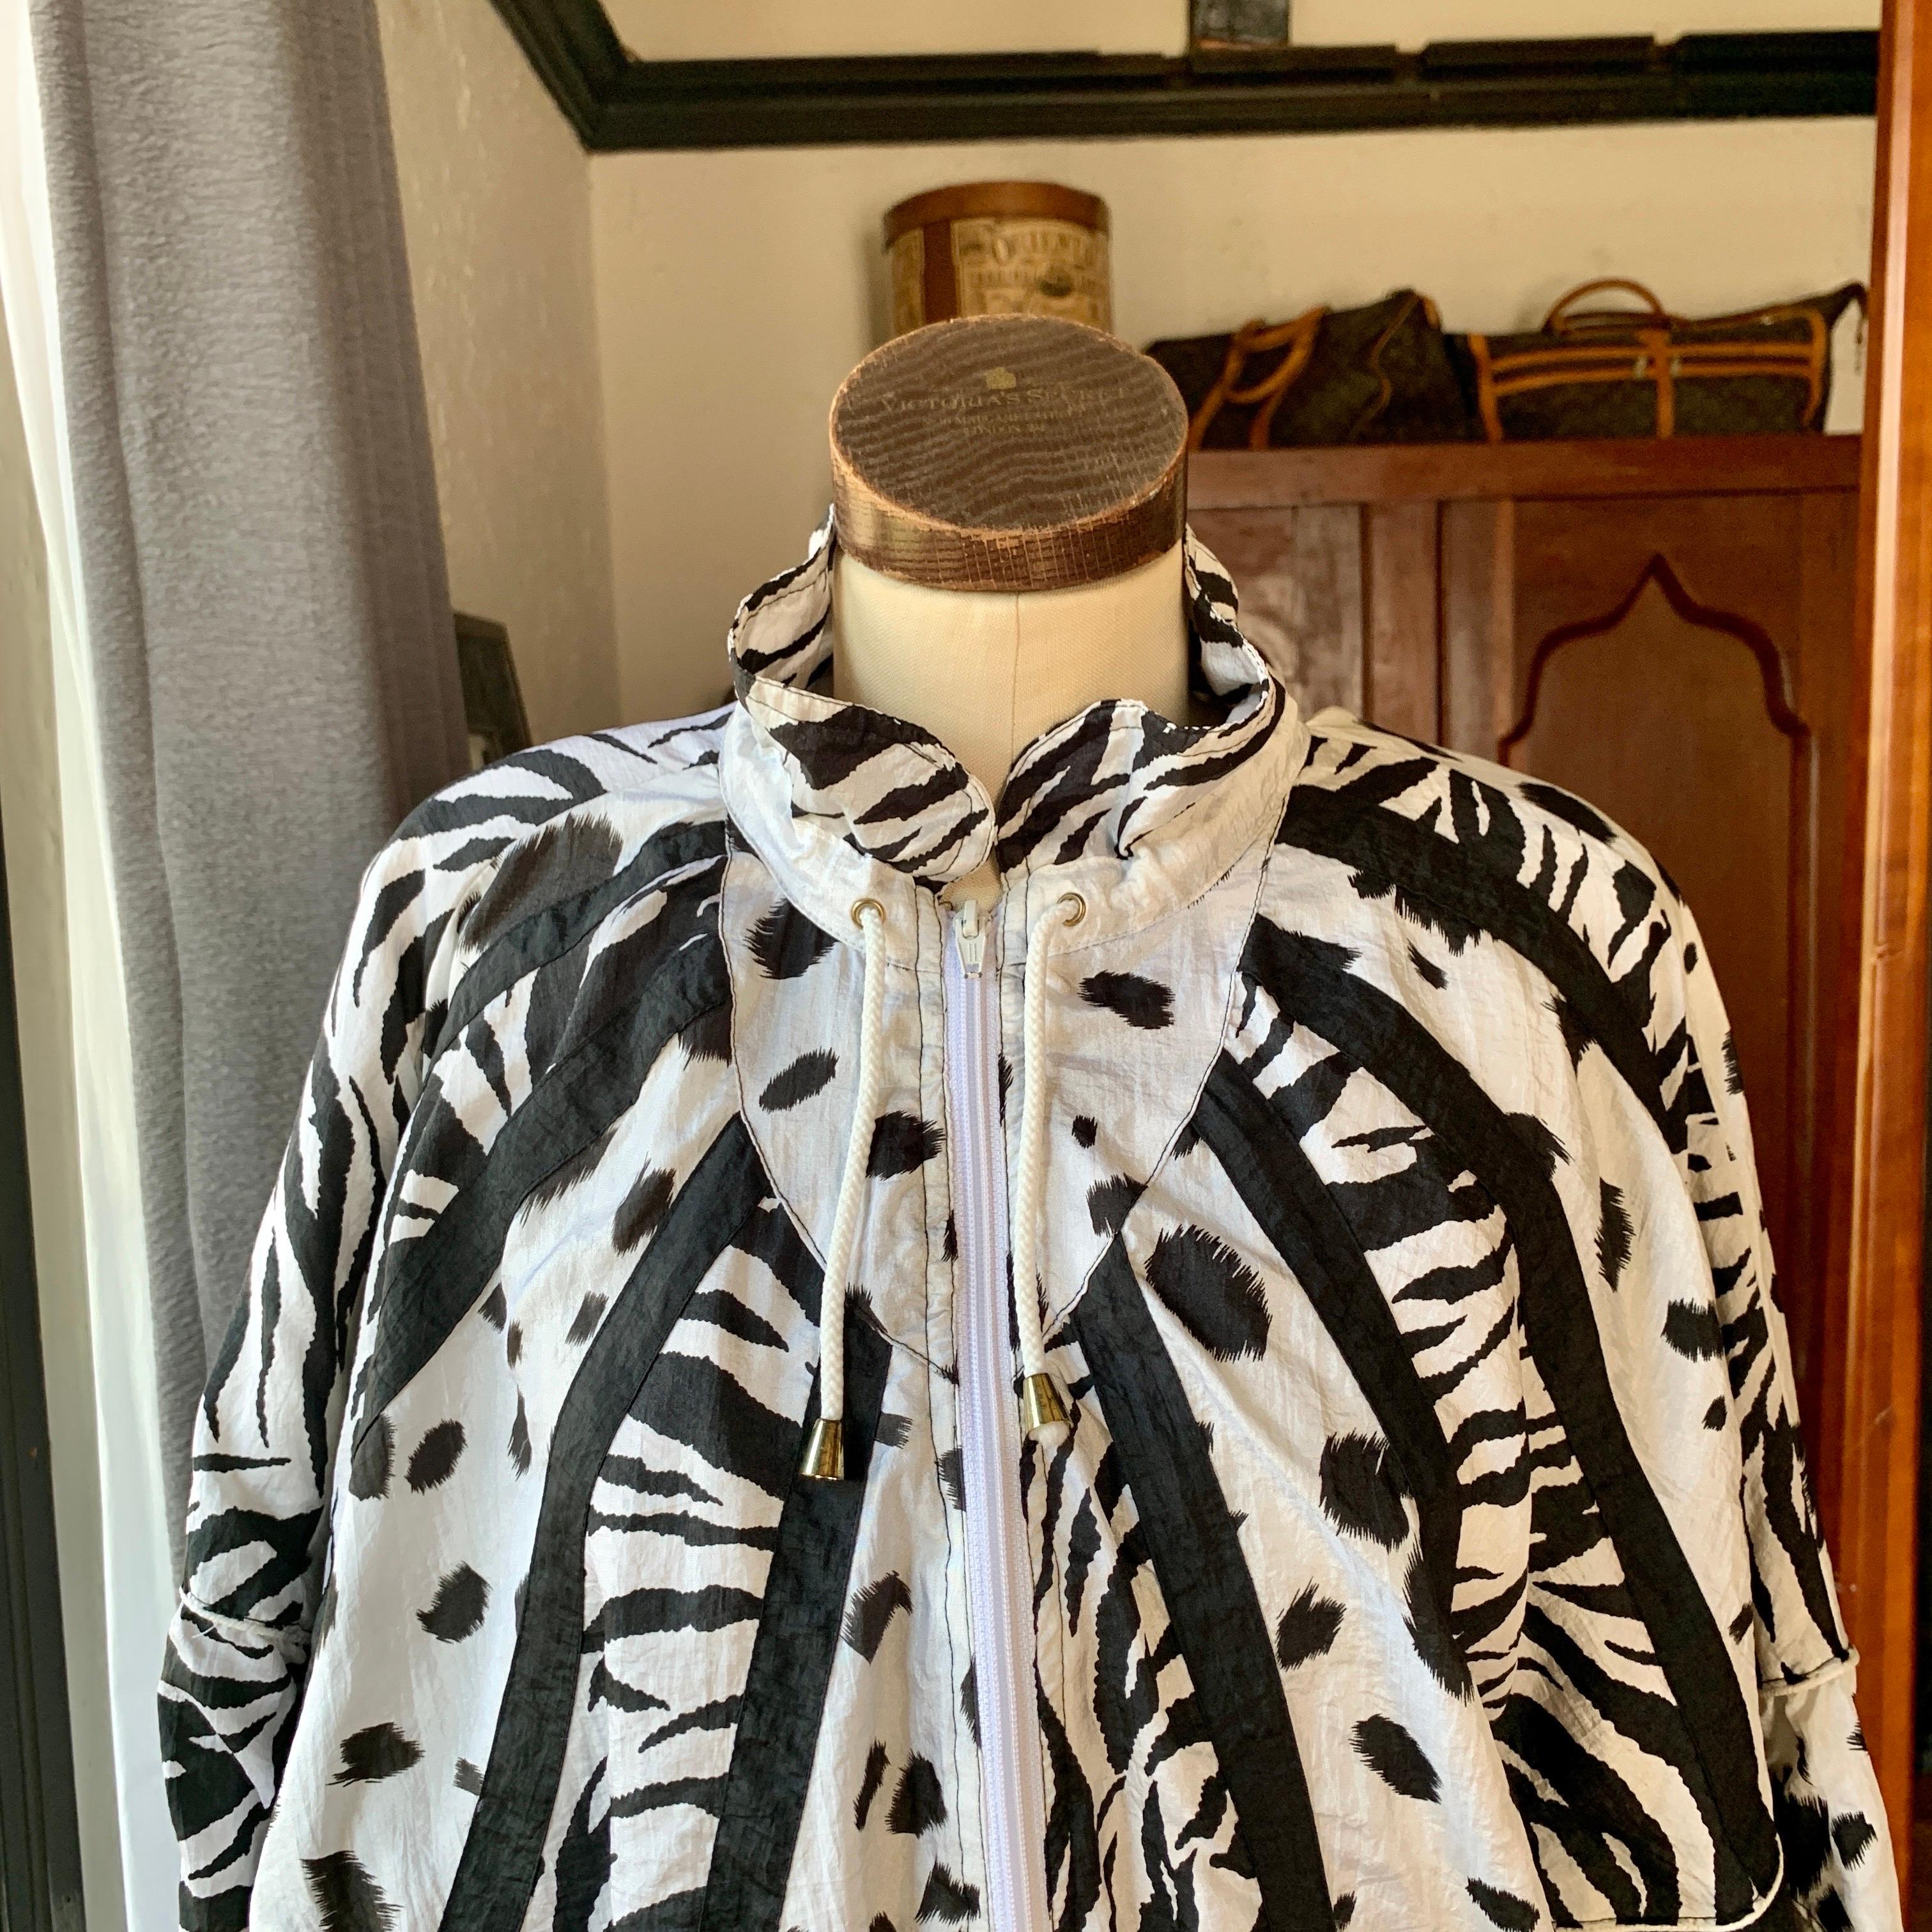 EVR, 80's, Division of Rousso Apparel, 100% Nylon, Zebra and Leopard Print, Zipper Front, Two Pockets, Drawstring Closure Made in Bangladesh, Size Large

Measurements Laying Flat (Has Stretch)

Bust 25